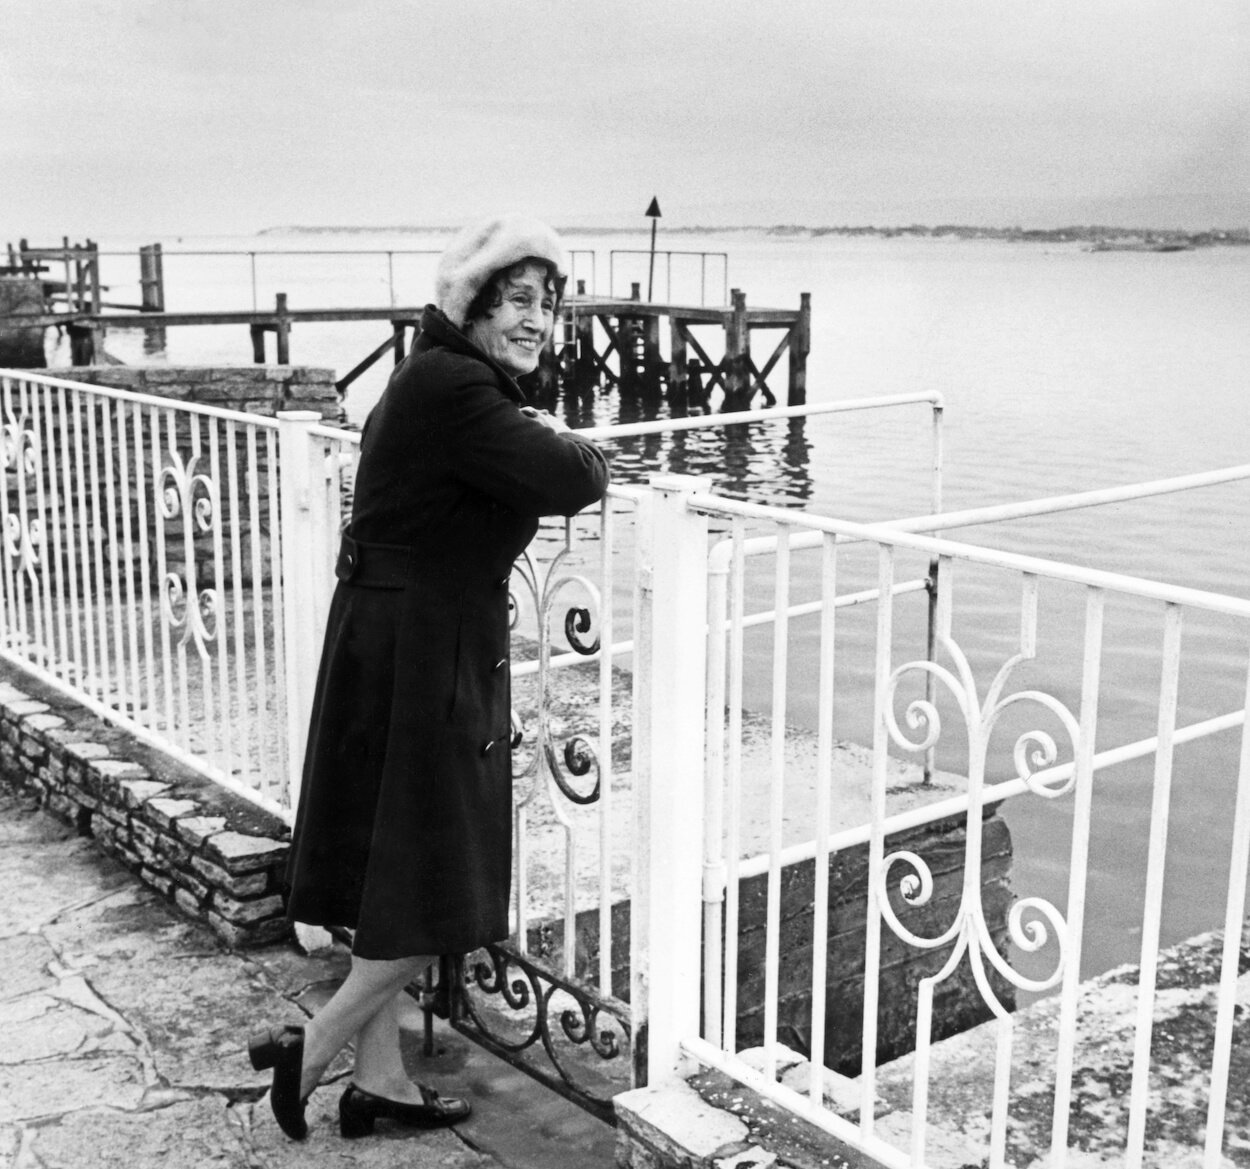 John Lennon's aunt Mimi standing near an iron fence looking out over Poole Harbour in England.